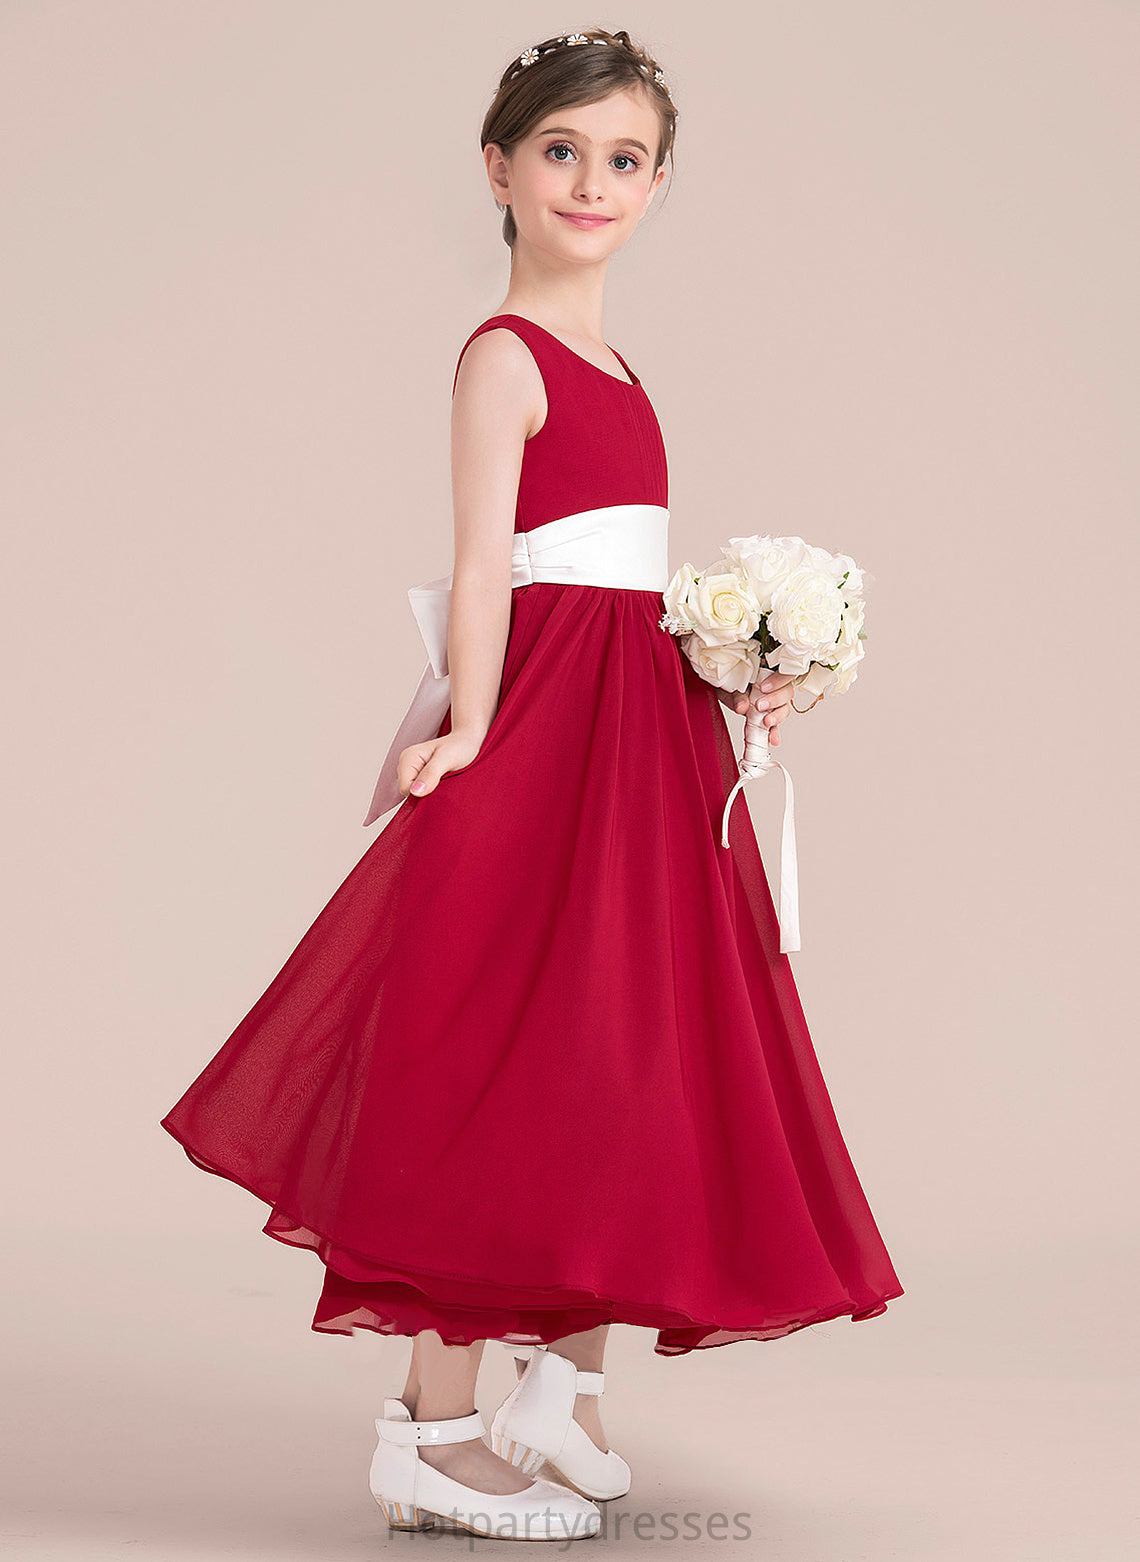 Scarlett With Ankle-Length Junior Bridesmaid Dresses Neck A-Line Chiffon Sash Empire Scoop Bow(s)